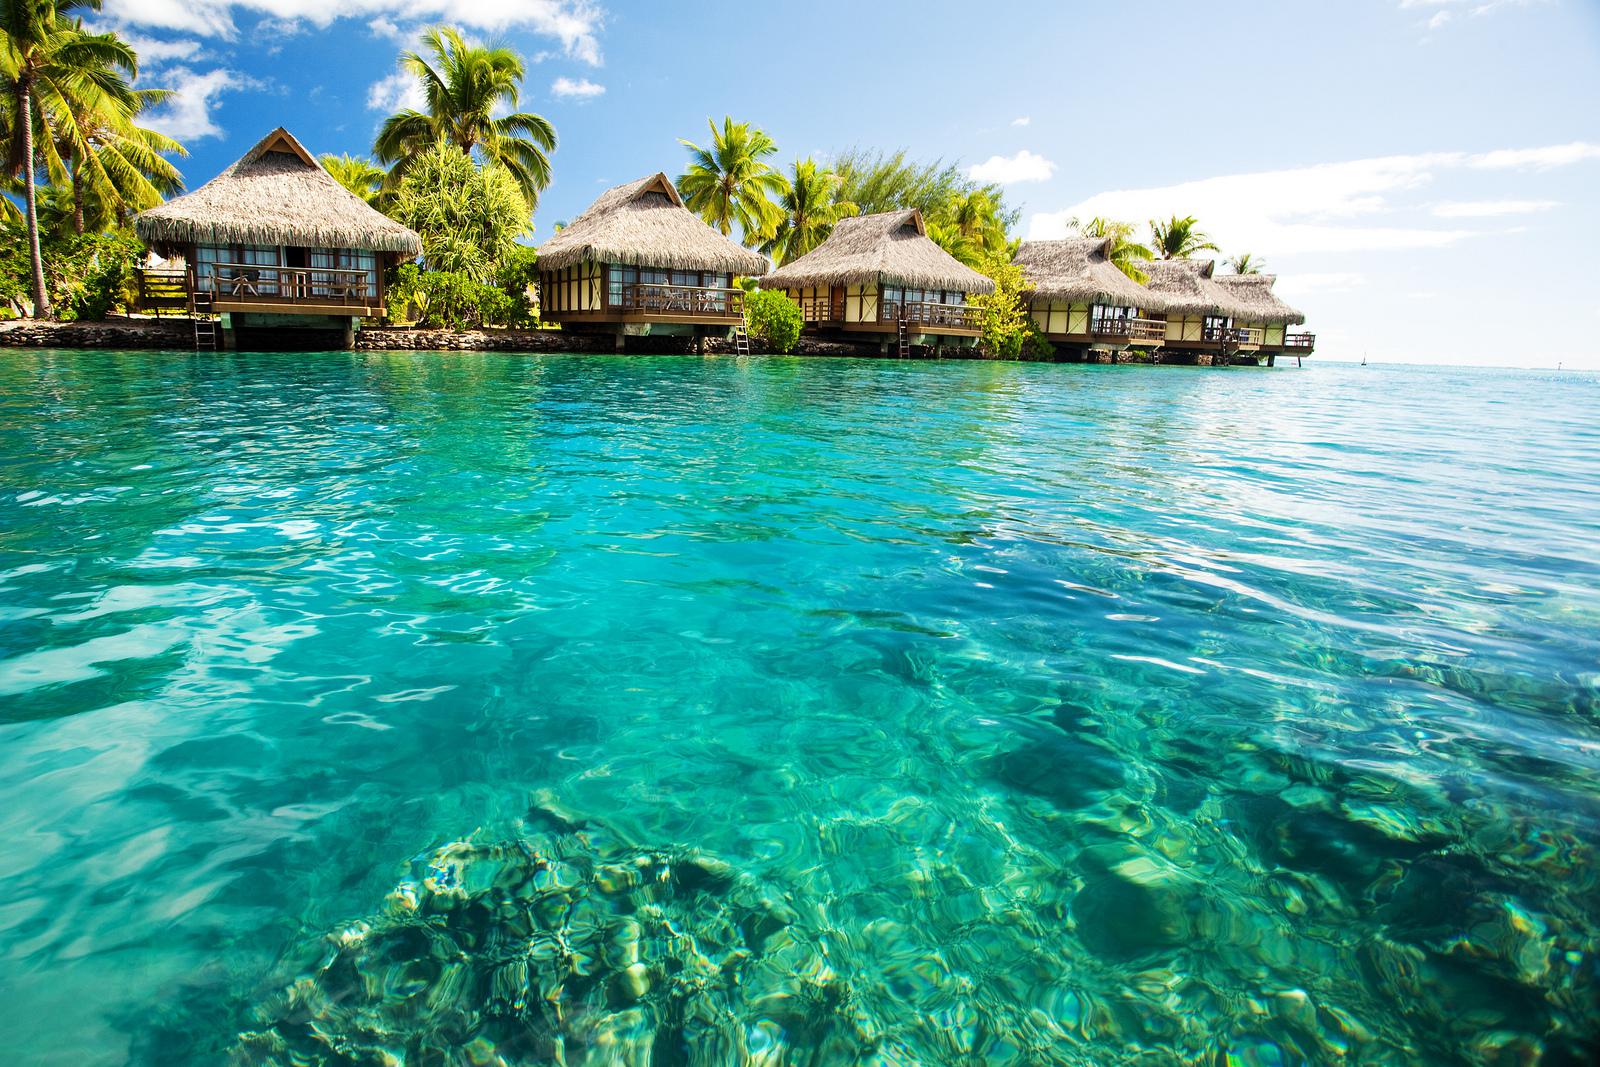 Coral reef at moorea island - (#147698) - High Quality and ...